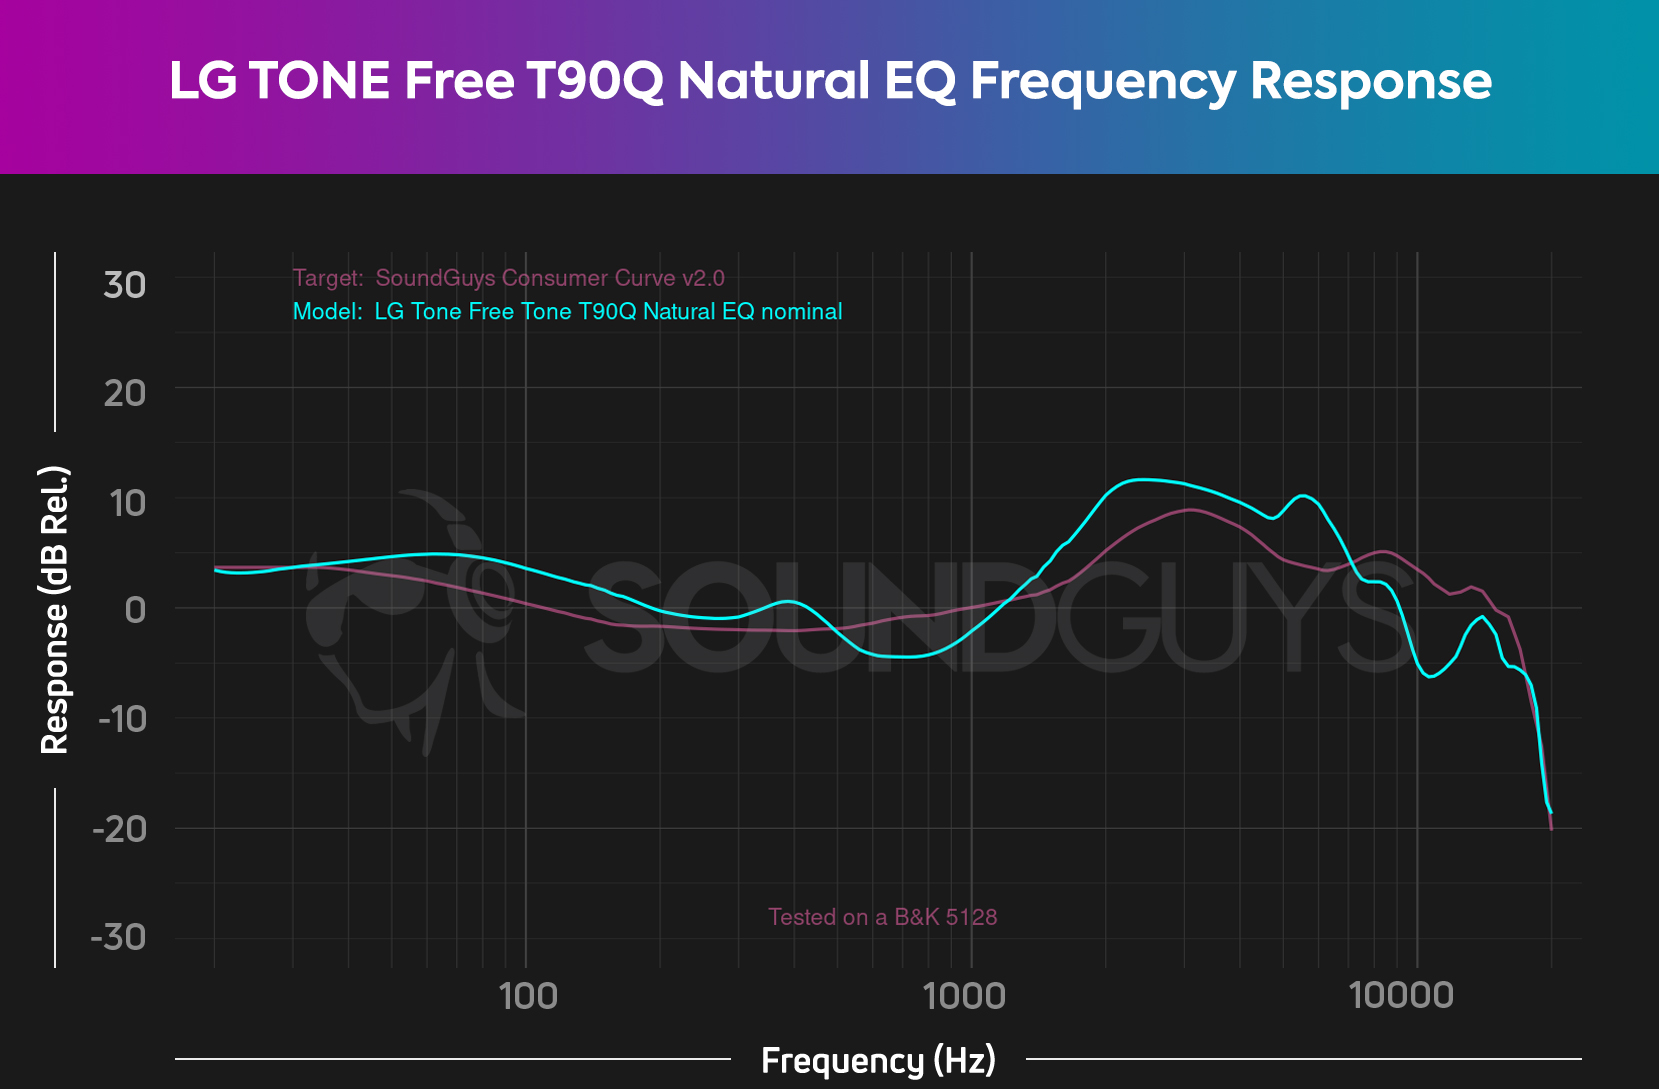 The frequency response chart for the LG TONE Free T90Q showing the Natural EQ, with lower bass emphasis than other EQs.